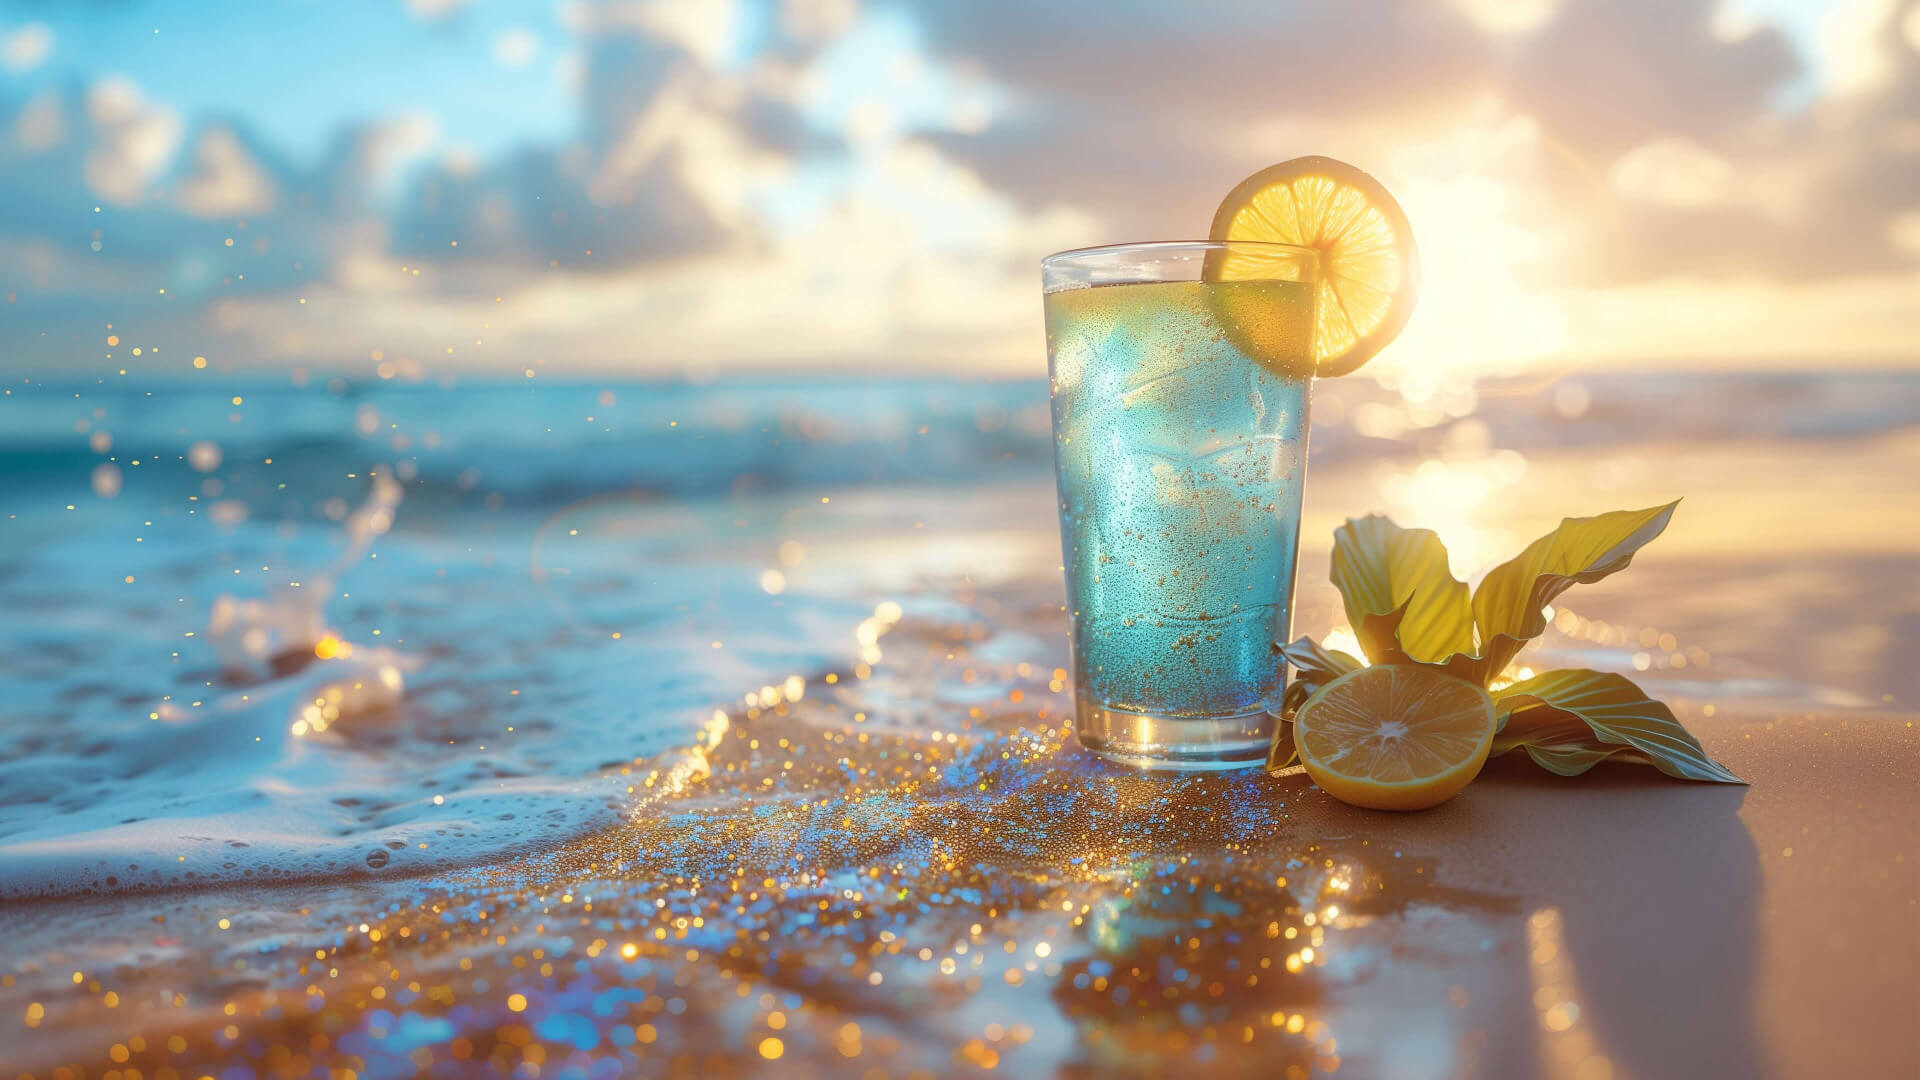 Cold drink on the ocean shore wallpaper 1600x900